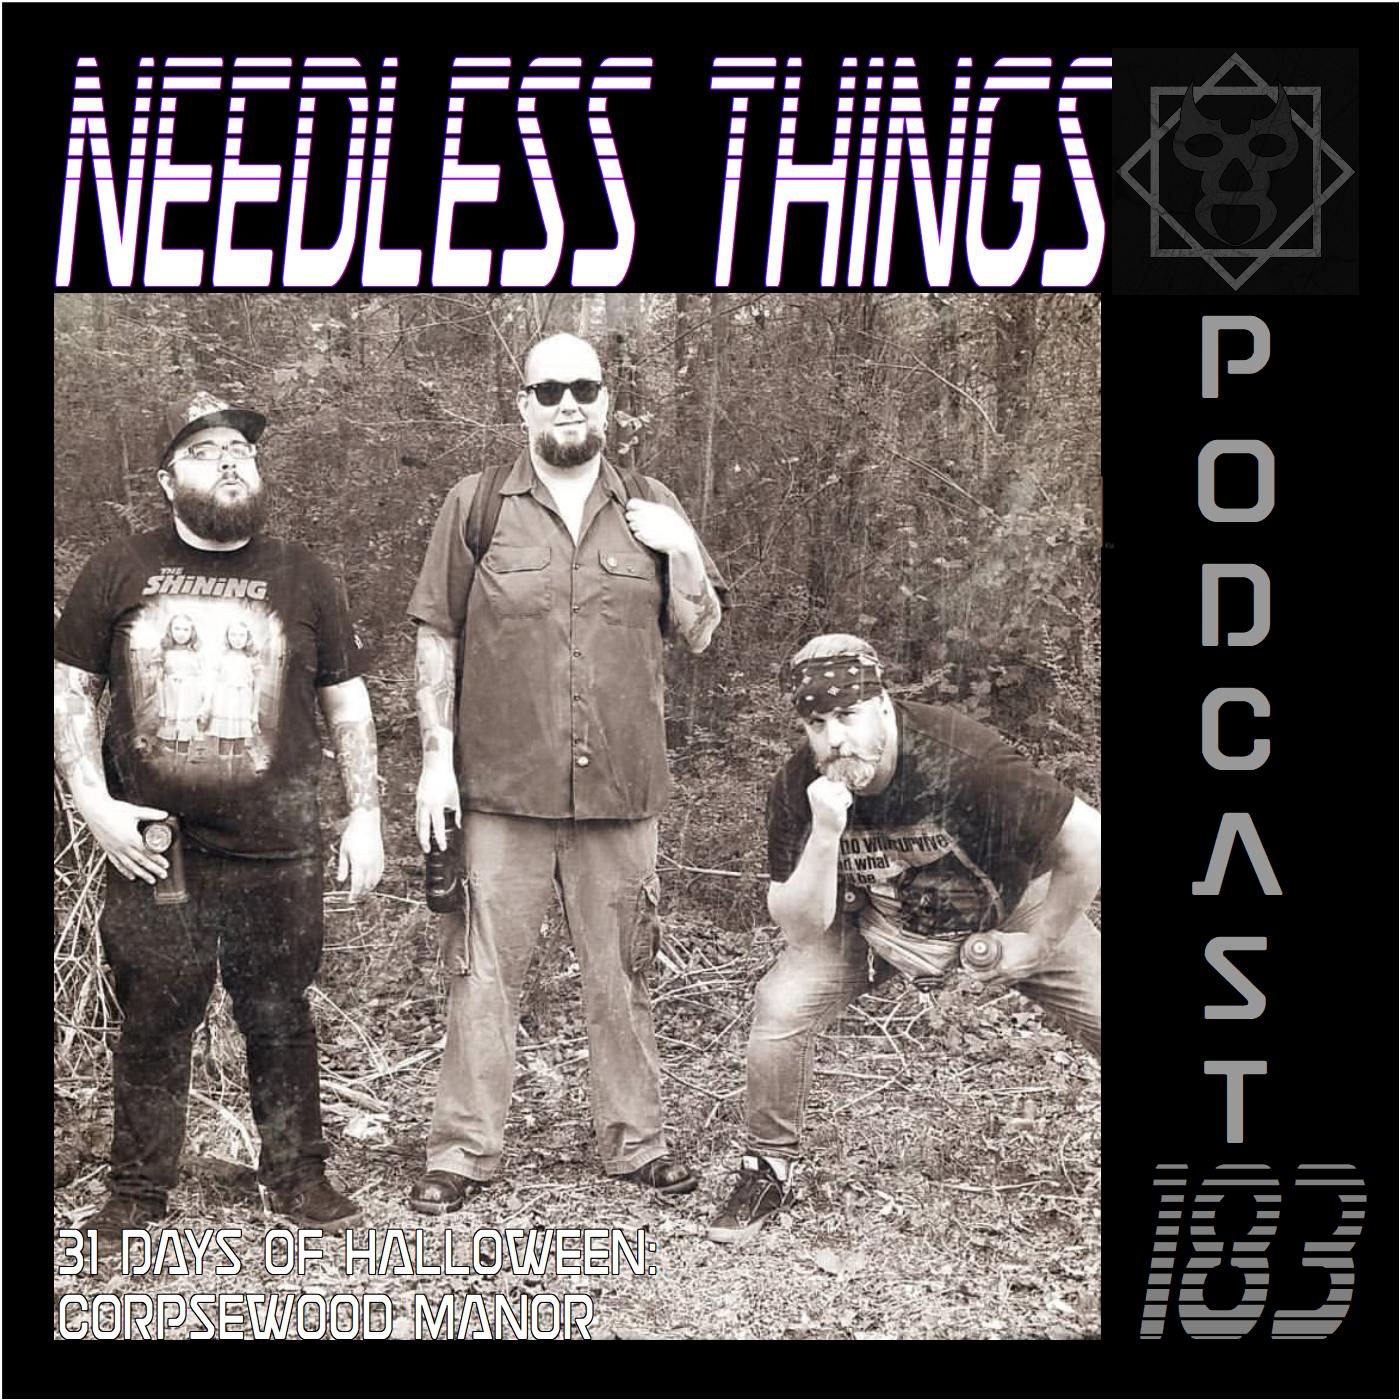 Needless Things Podcast 183 – 31 Days of Halloween: Corpsewood Manor